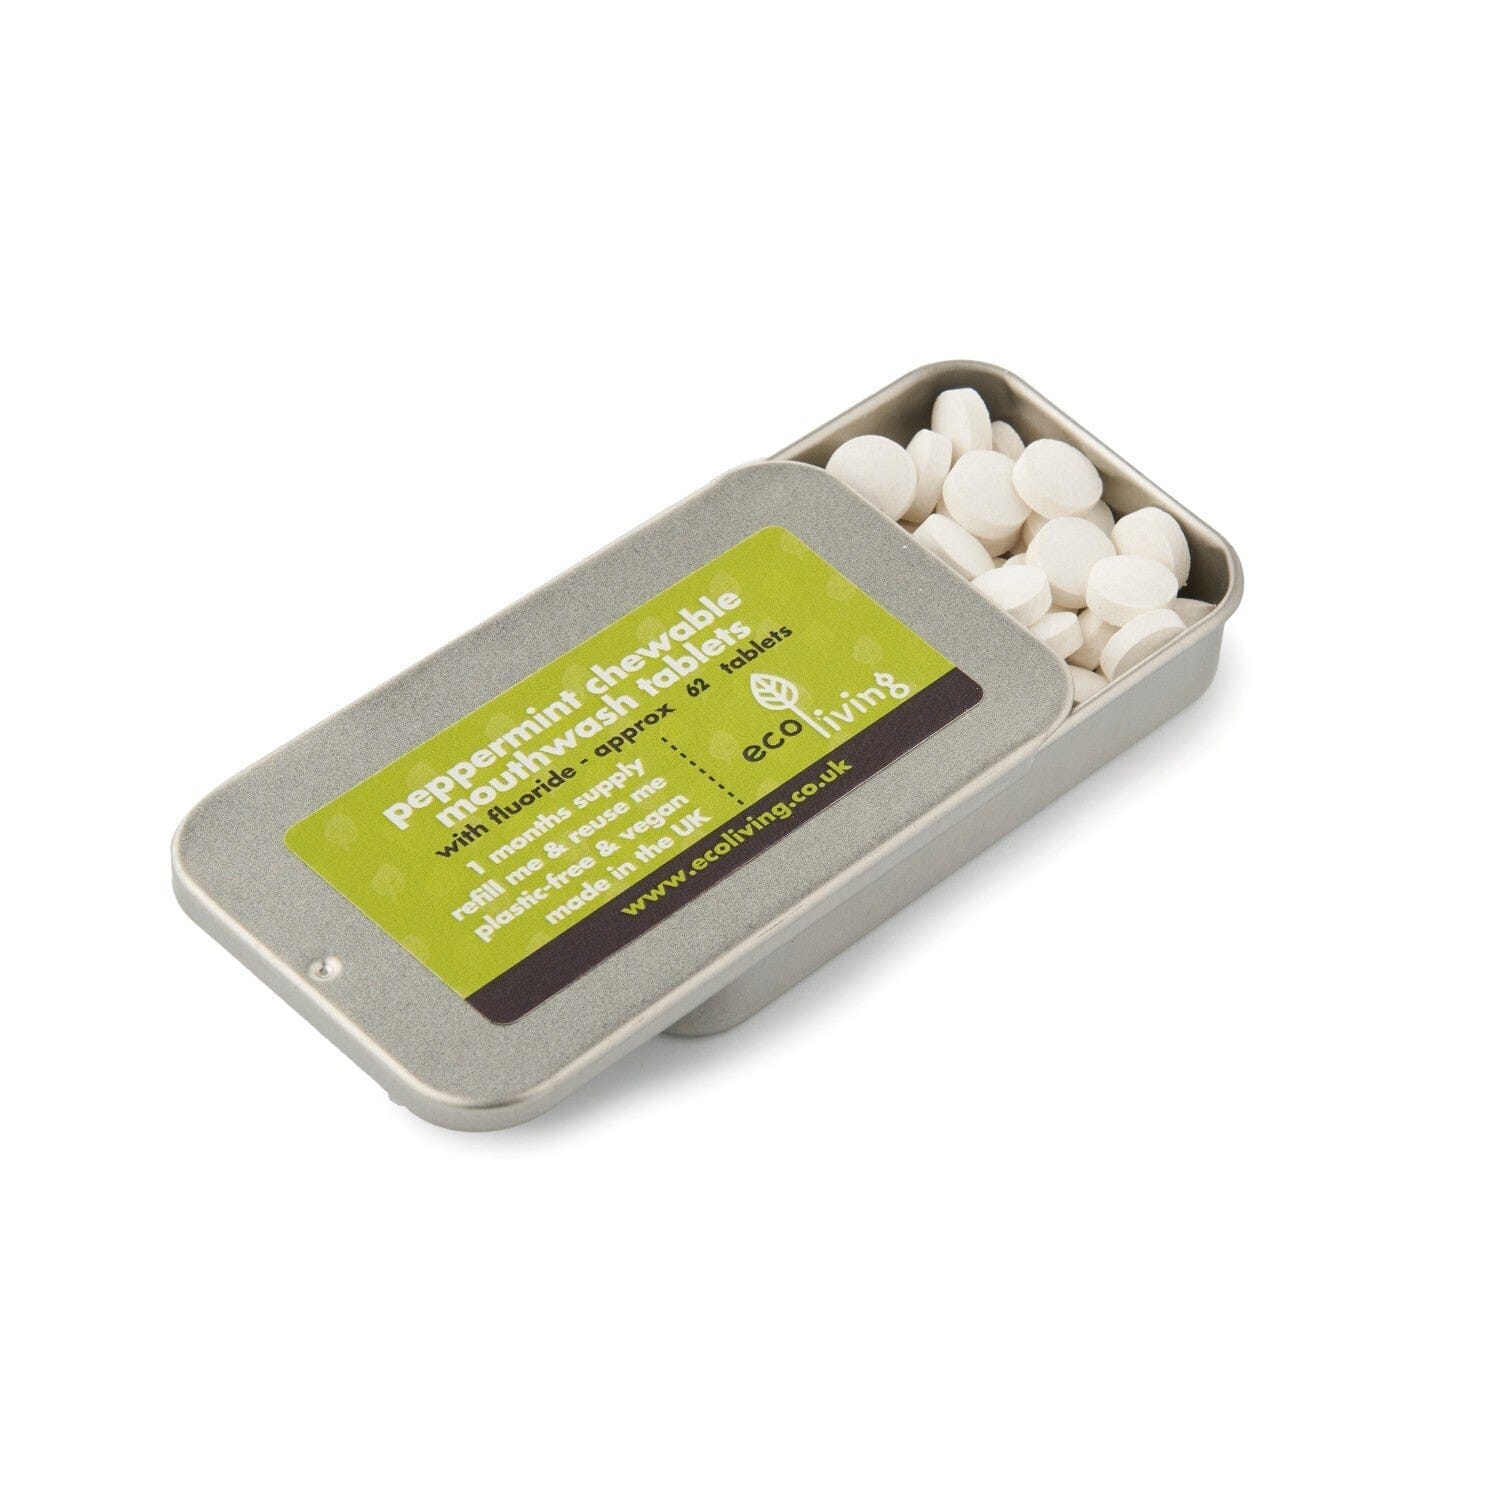 Peppermint Chewable Mouthwash Tablets - www.thecotswoldecocompany.co.uk